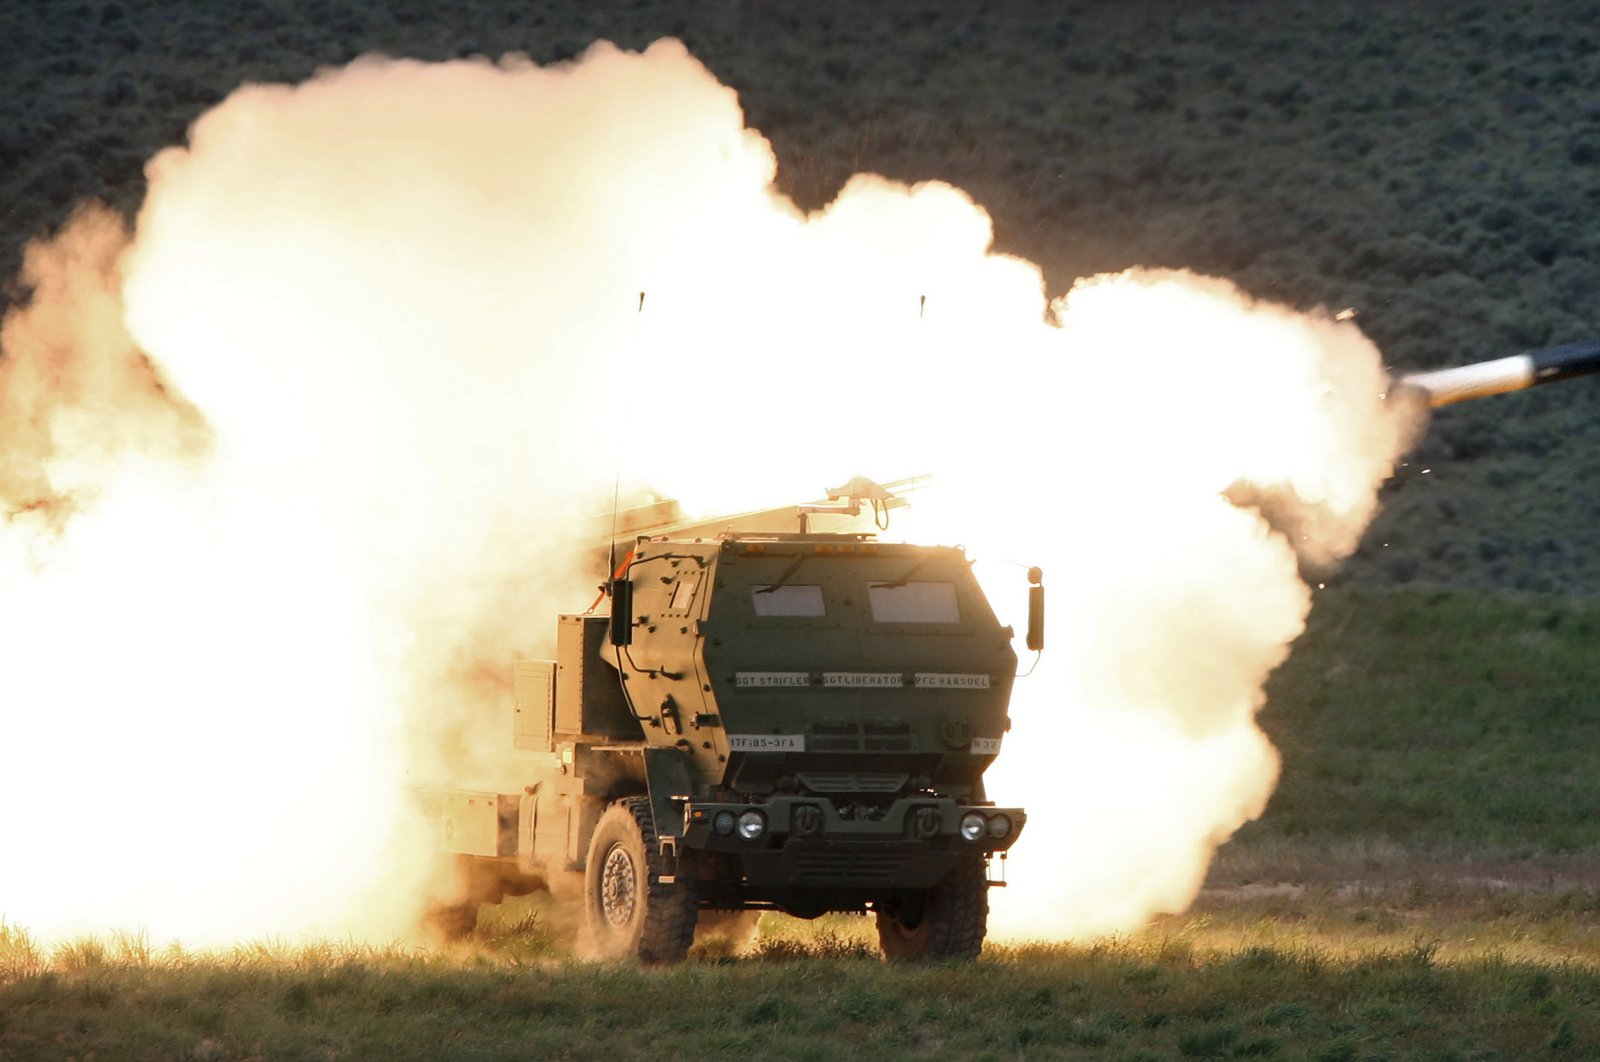 A launch truck fires the High Mobility Artillery Rocket System (HIMARS) produced by Lockheed Martin during combat training in the high desert of the Yakima Training Center, Washington, U.S., May 23, 2011. (AP Photo)